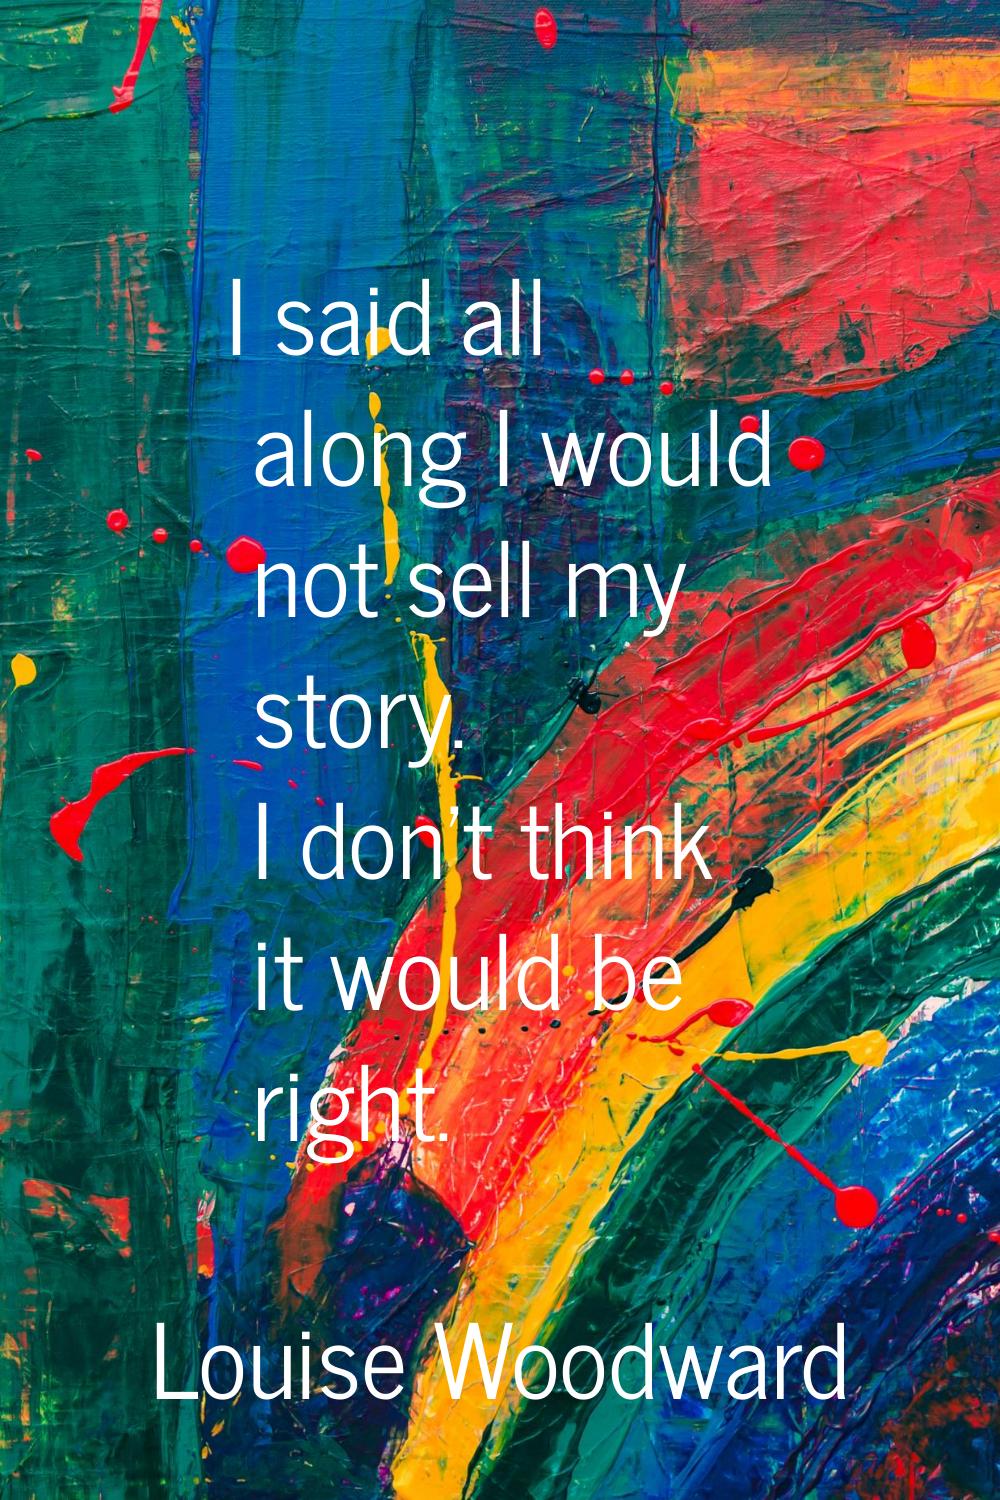 I said all along I would not sell my story. I don't think it would be right.